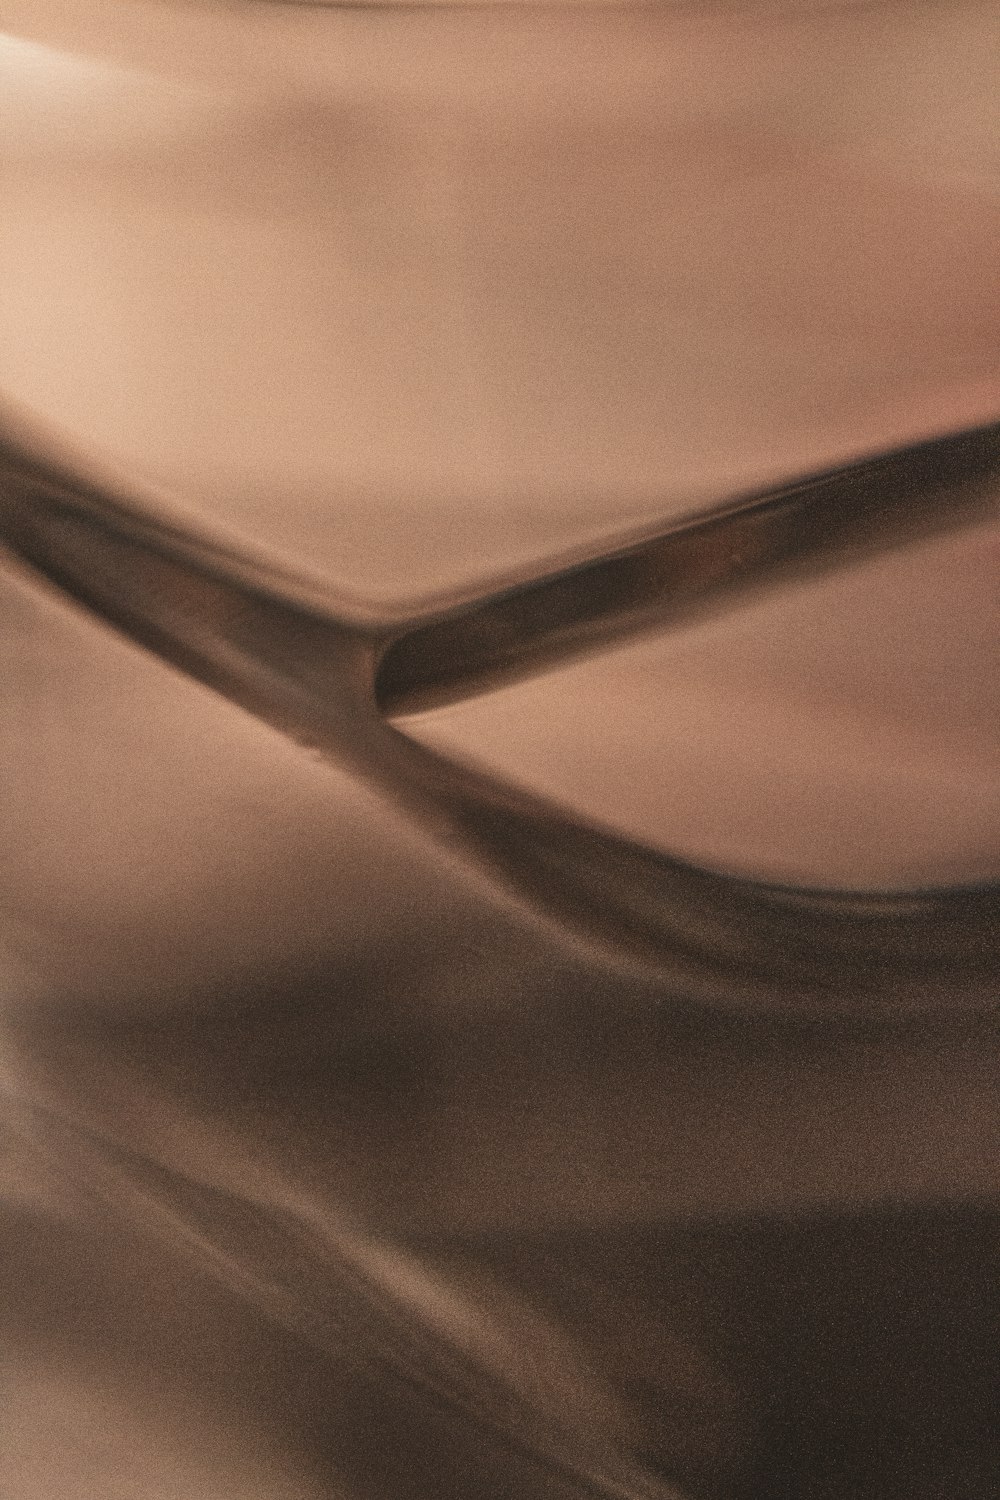 a blurry photograph of a curved object